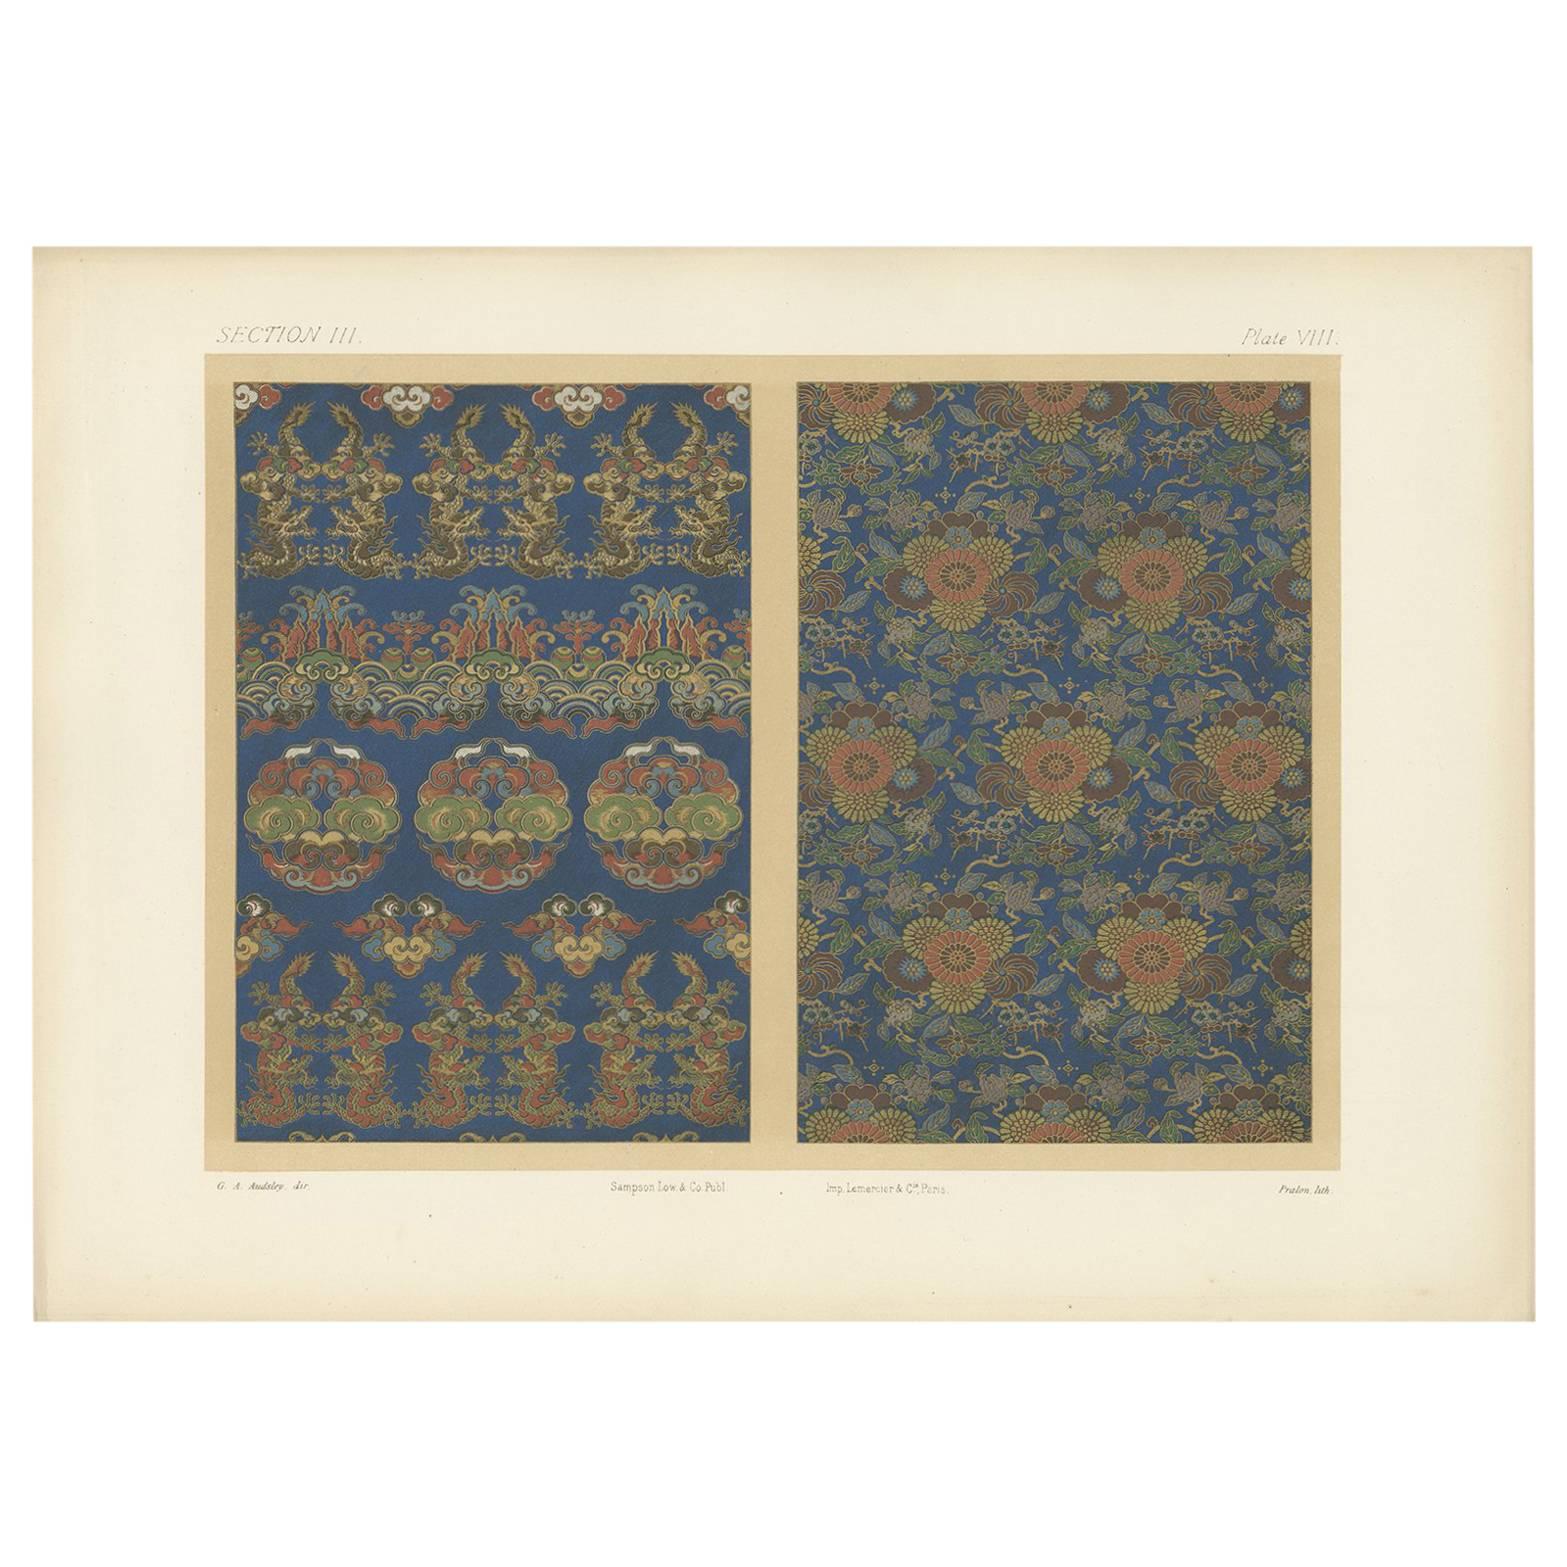 Antique Print of Silk and Gold Fabrics 'Japan' by G. Audsley, 1882 For Sale